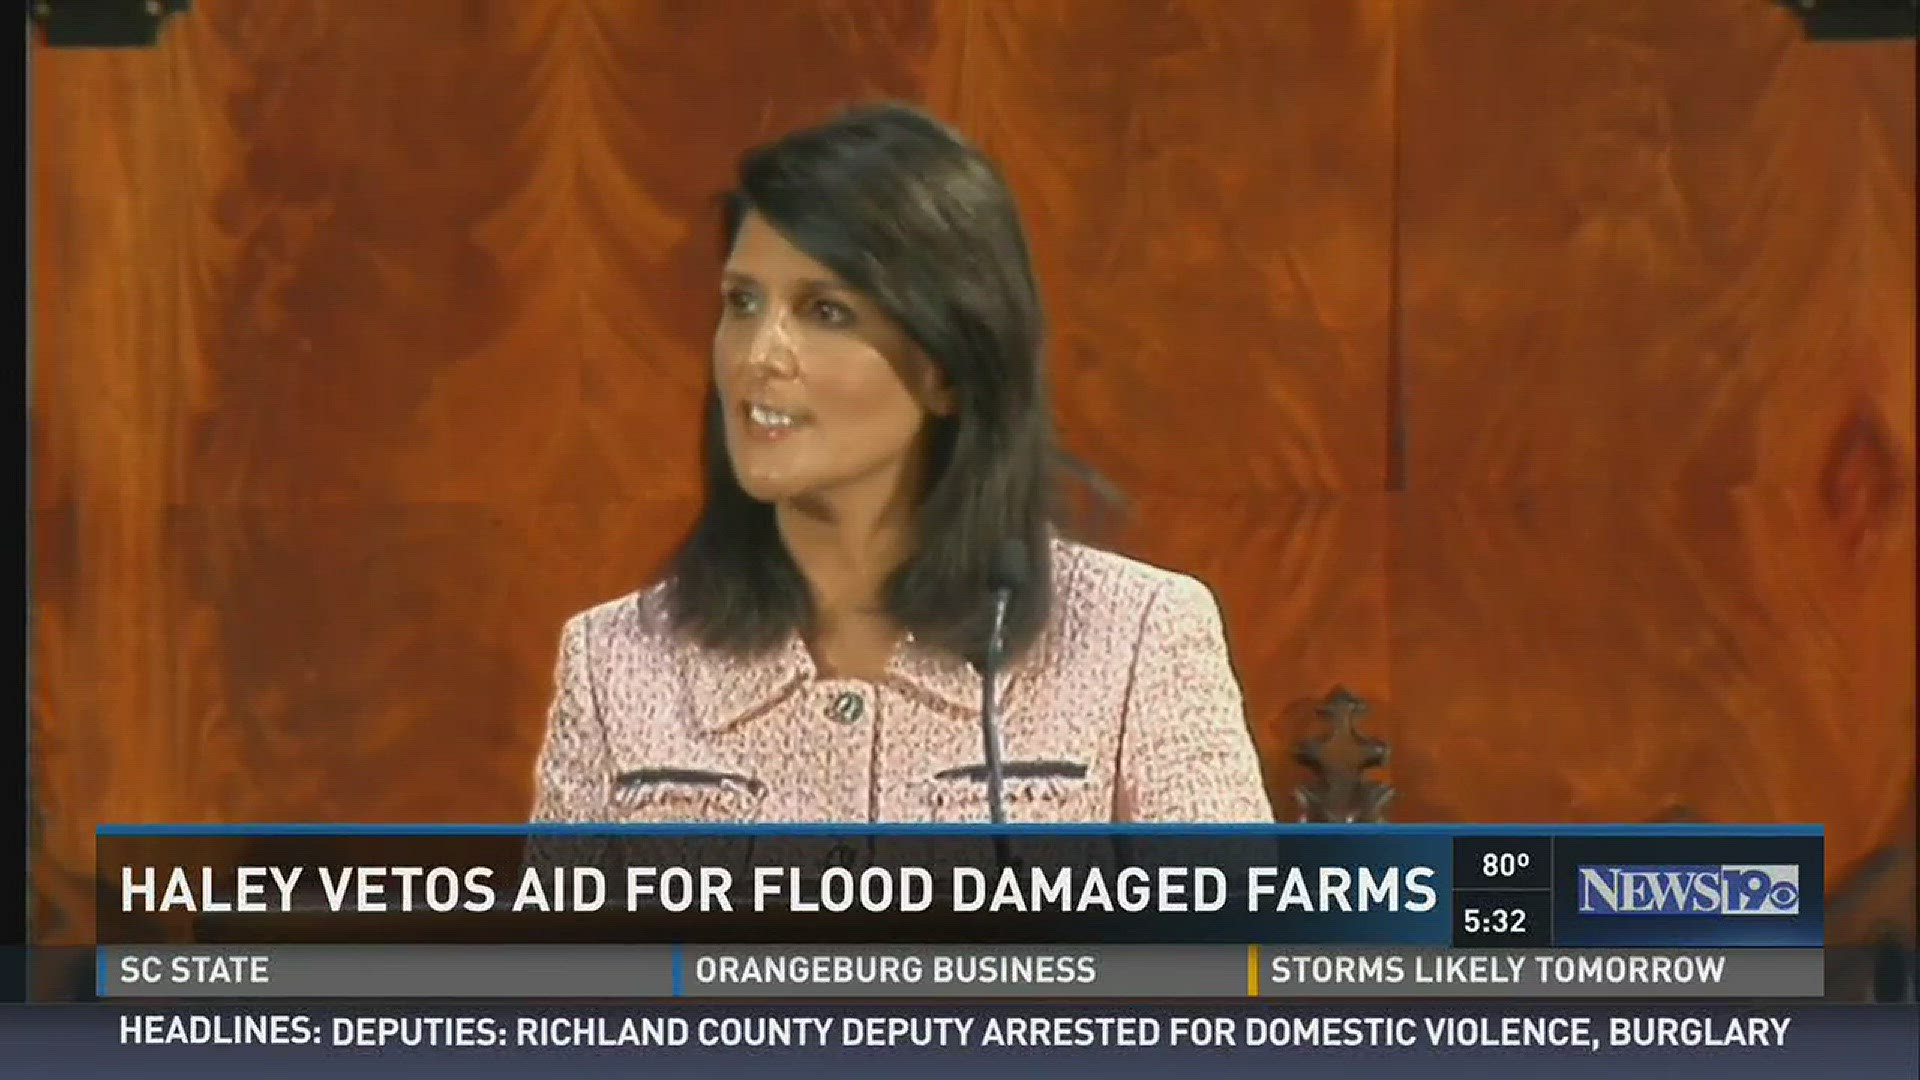 Gov. Haley officially disagreed with the legislature over how to help farmers.